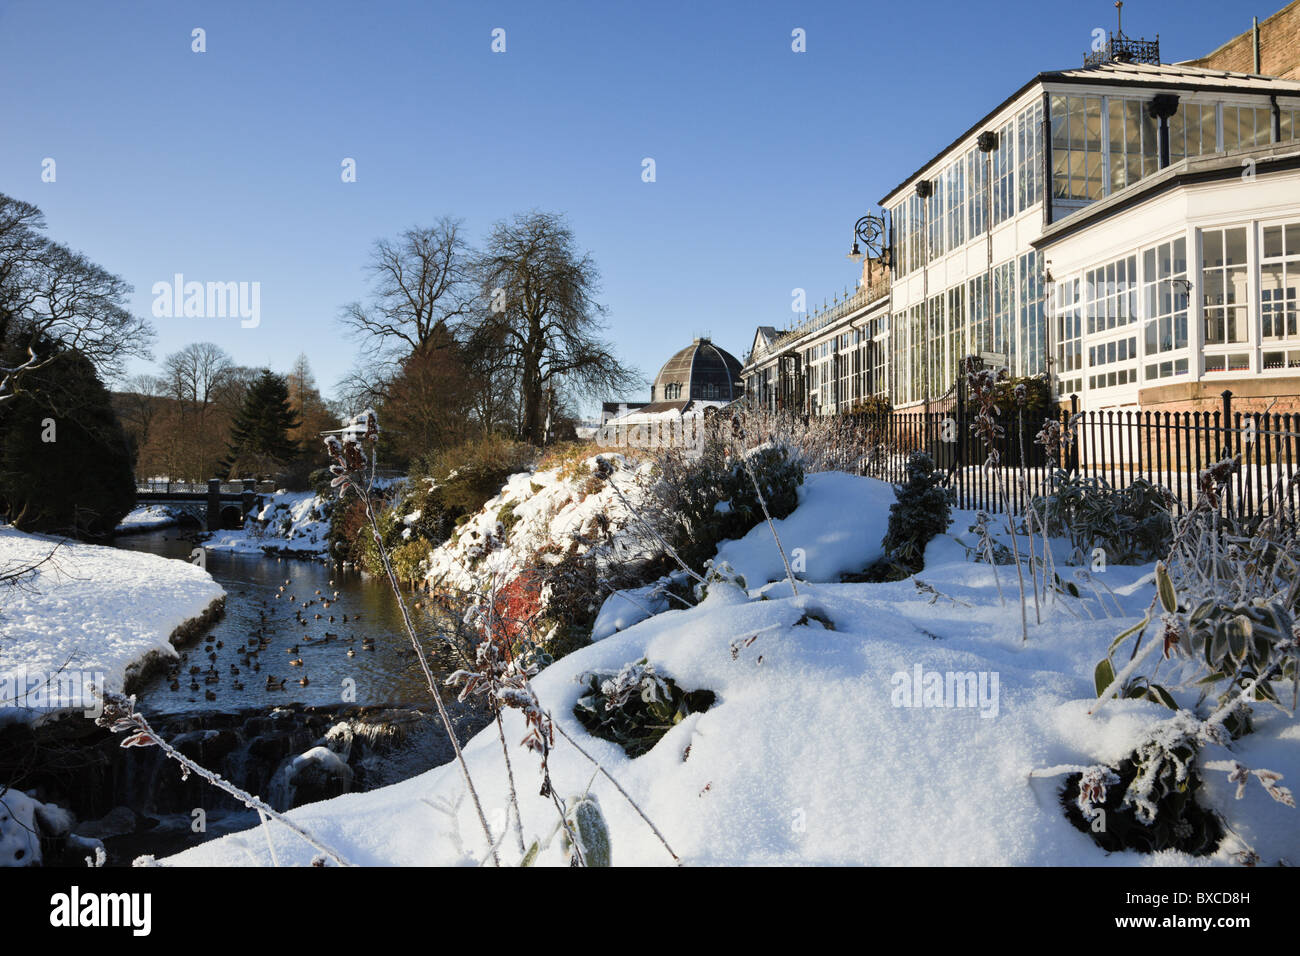 Buxton, Derbyshire, England, UK, Europe. Pavilion and Pavilion gardens river with snow in winter Stock Photo